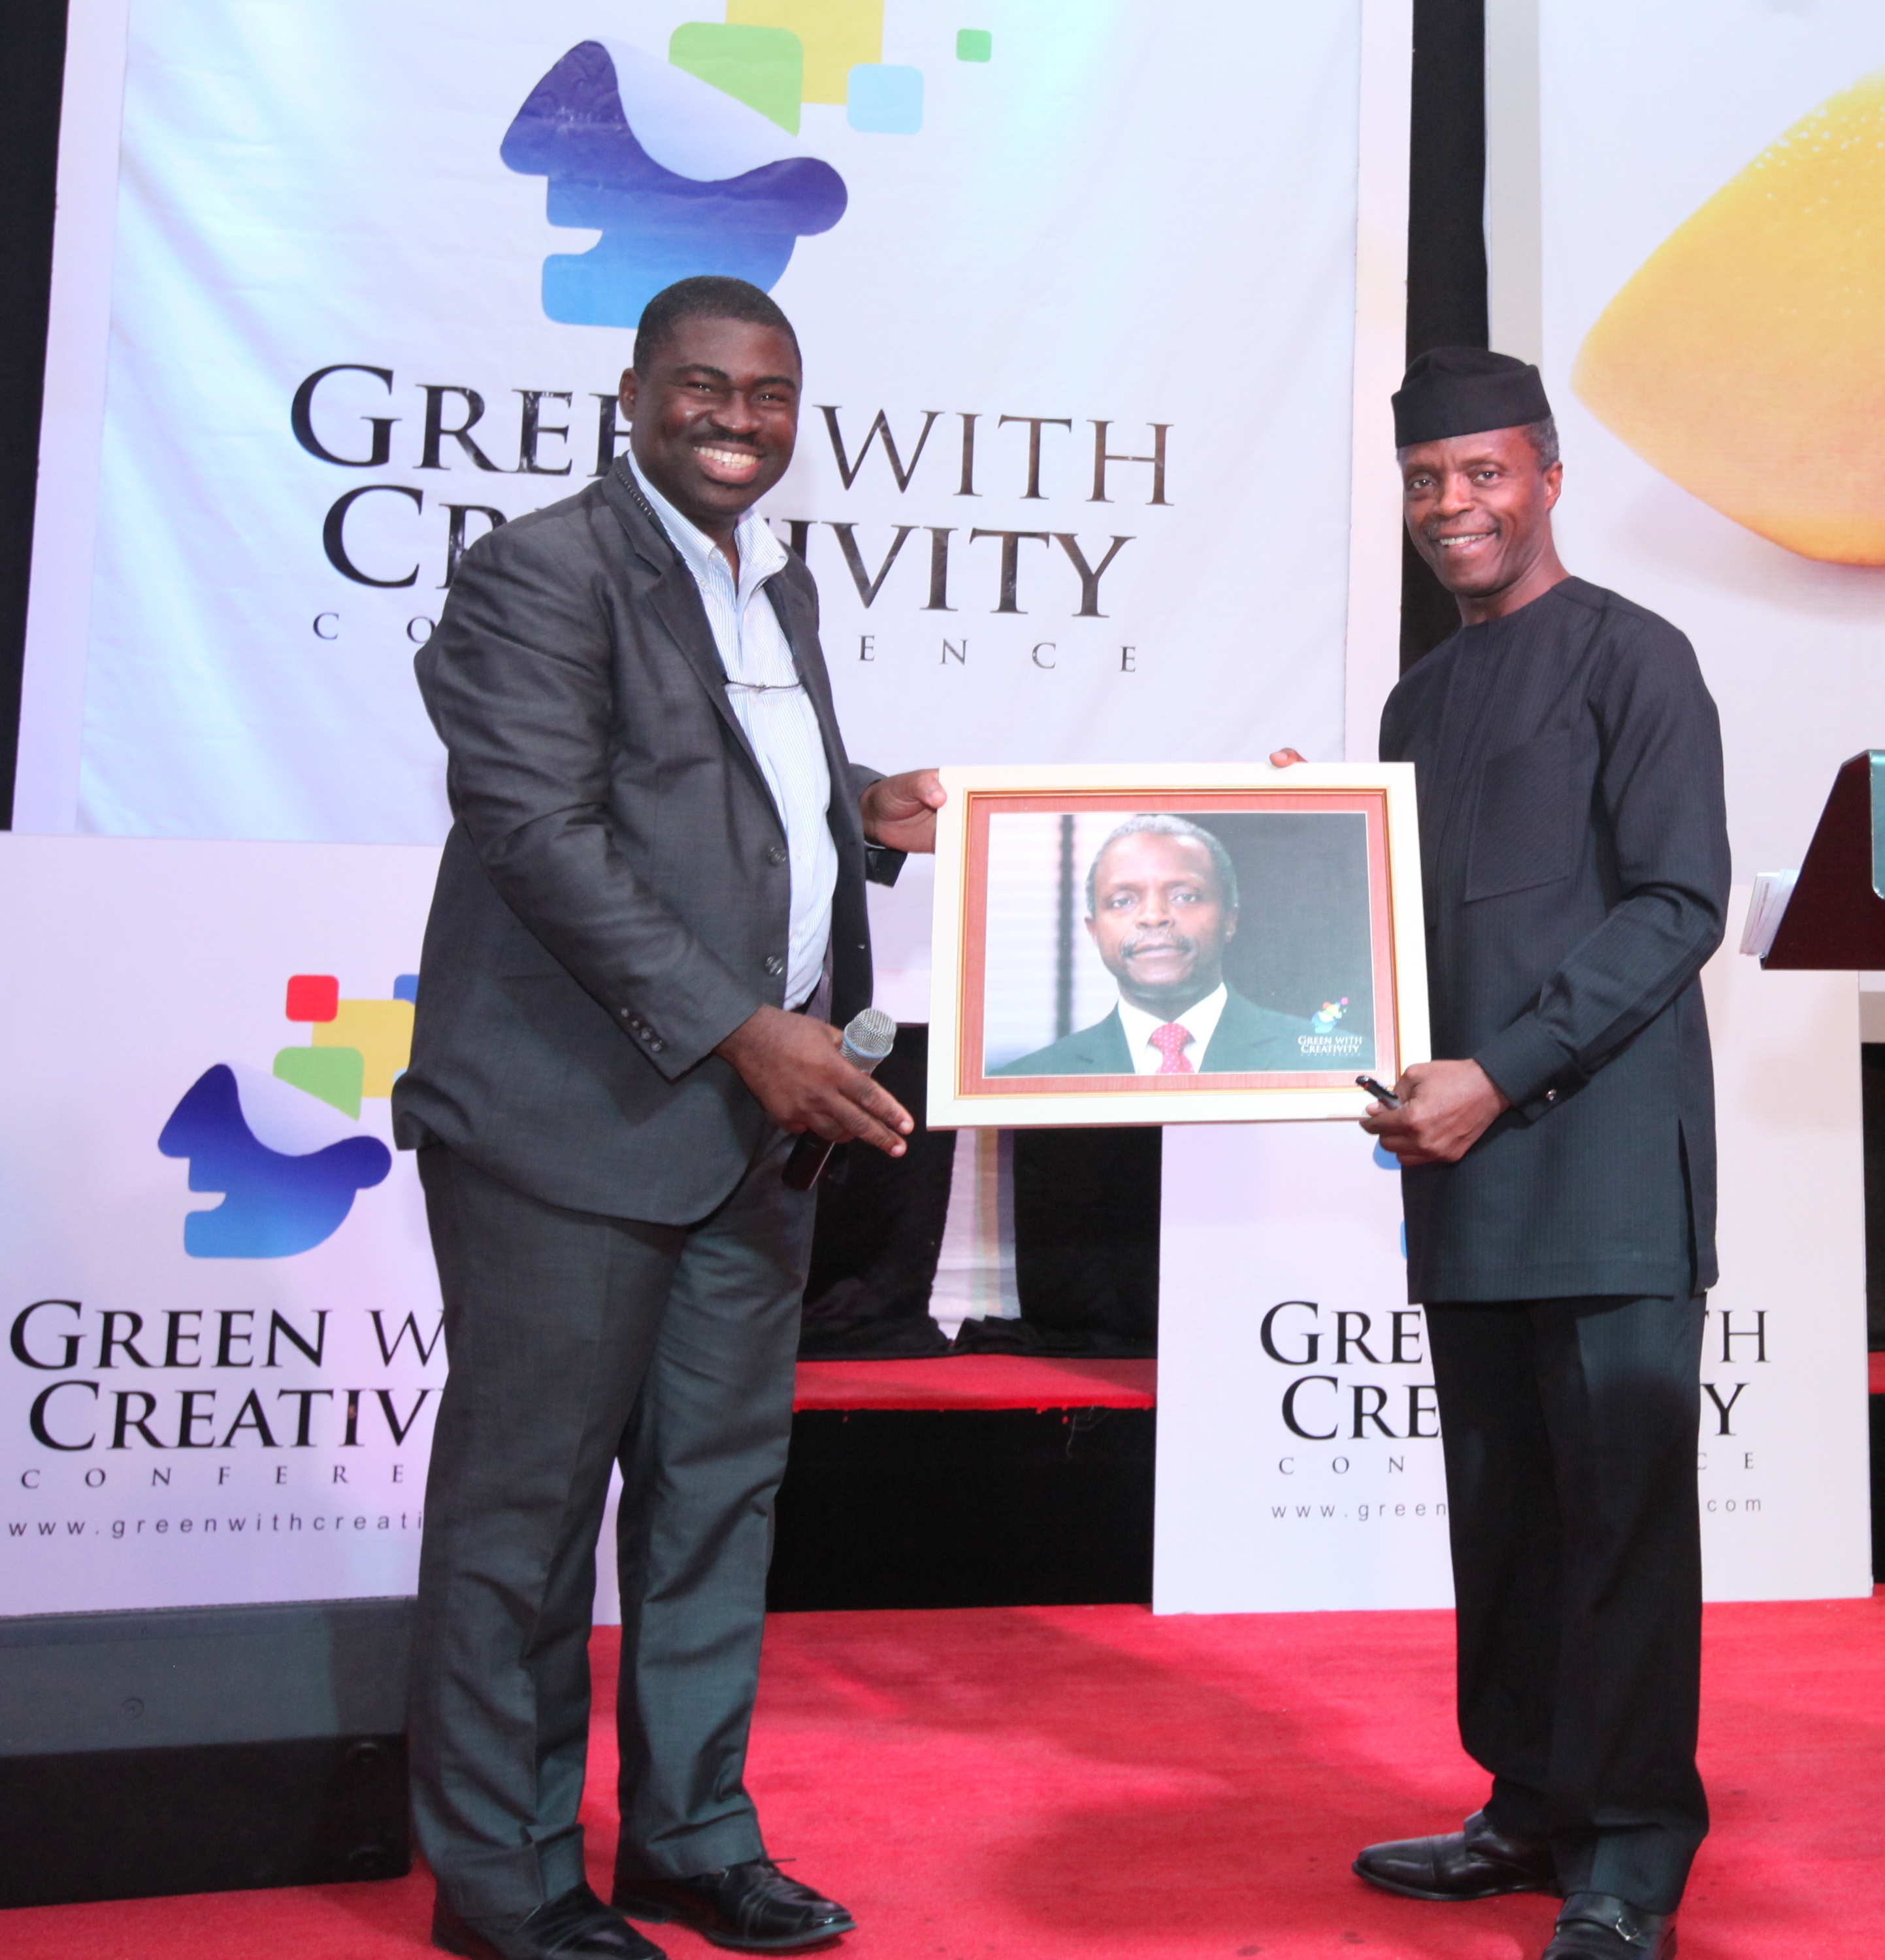 VP Osinbajo Attends The Green With Creativity Conference Lagos On 07/05/2016